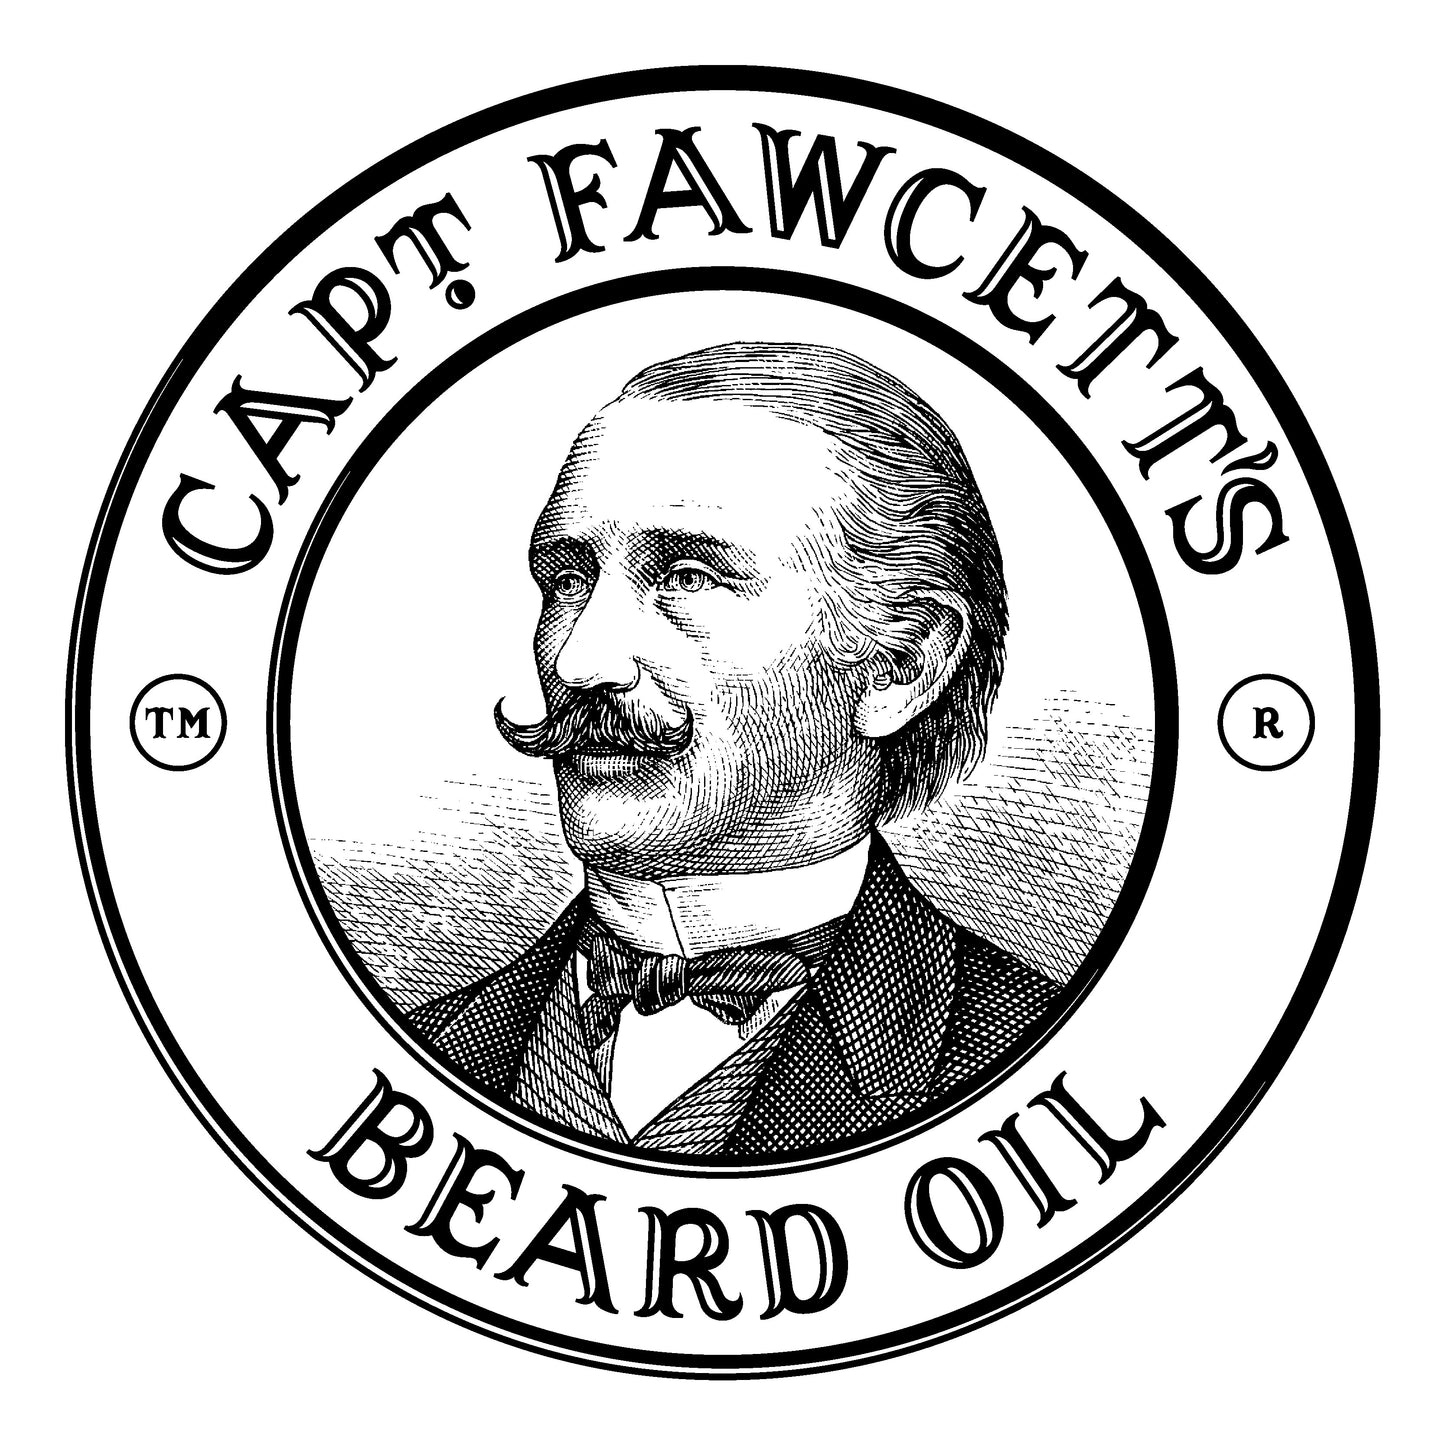 Captain Fawcett Sid Sottung's Barberism Pre-Shave Oil for Sid Sottung Academy 50ml